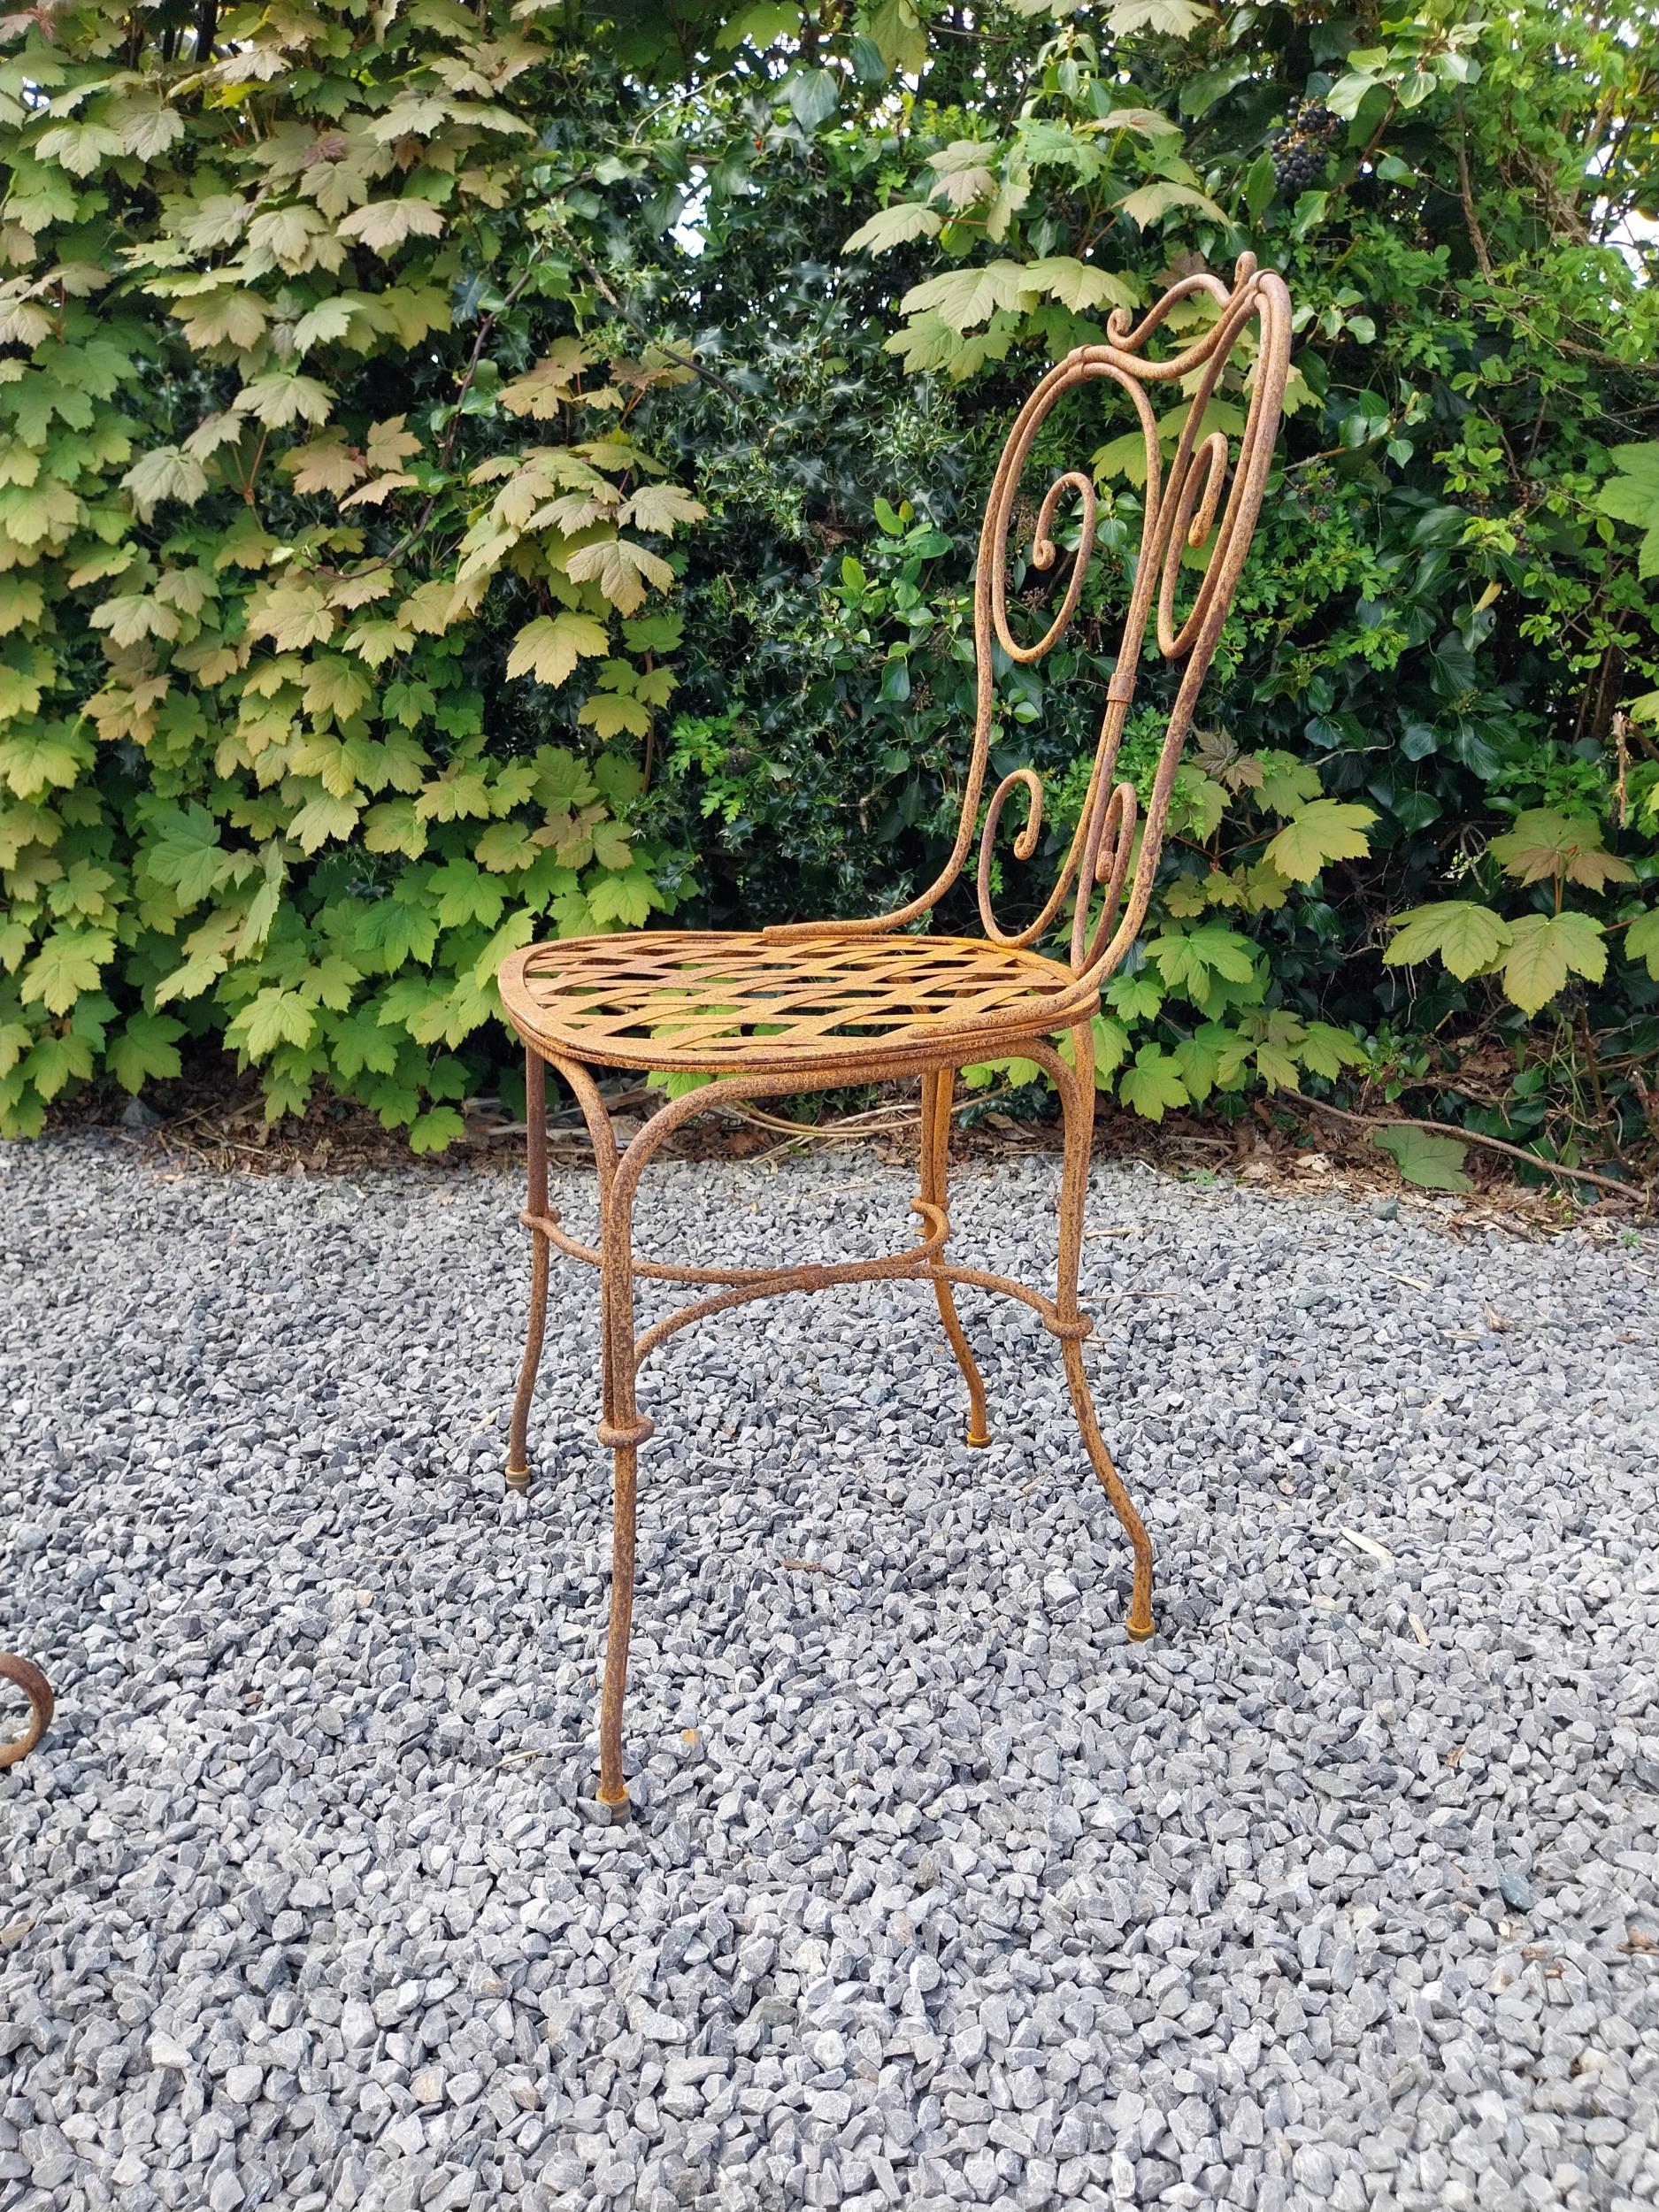 Wrought iron café - garden circular table with two matching chairs {Tbl. 75 cm H x 70 cm Dia. Chairs - Image 6 of 10